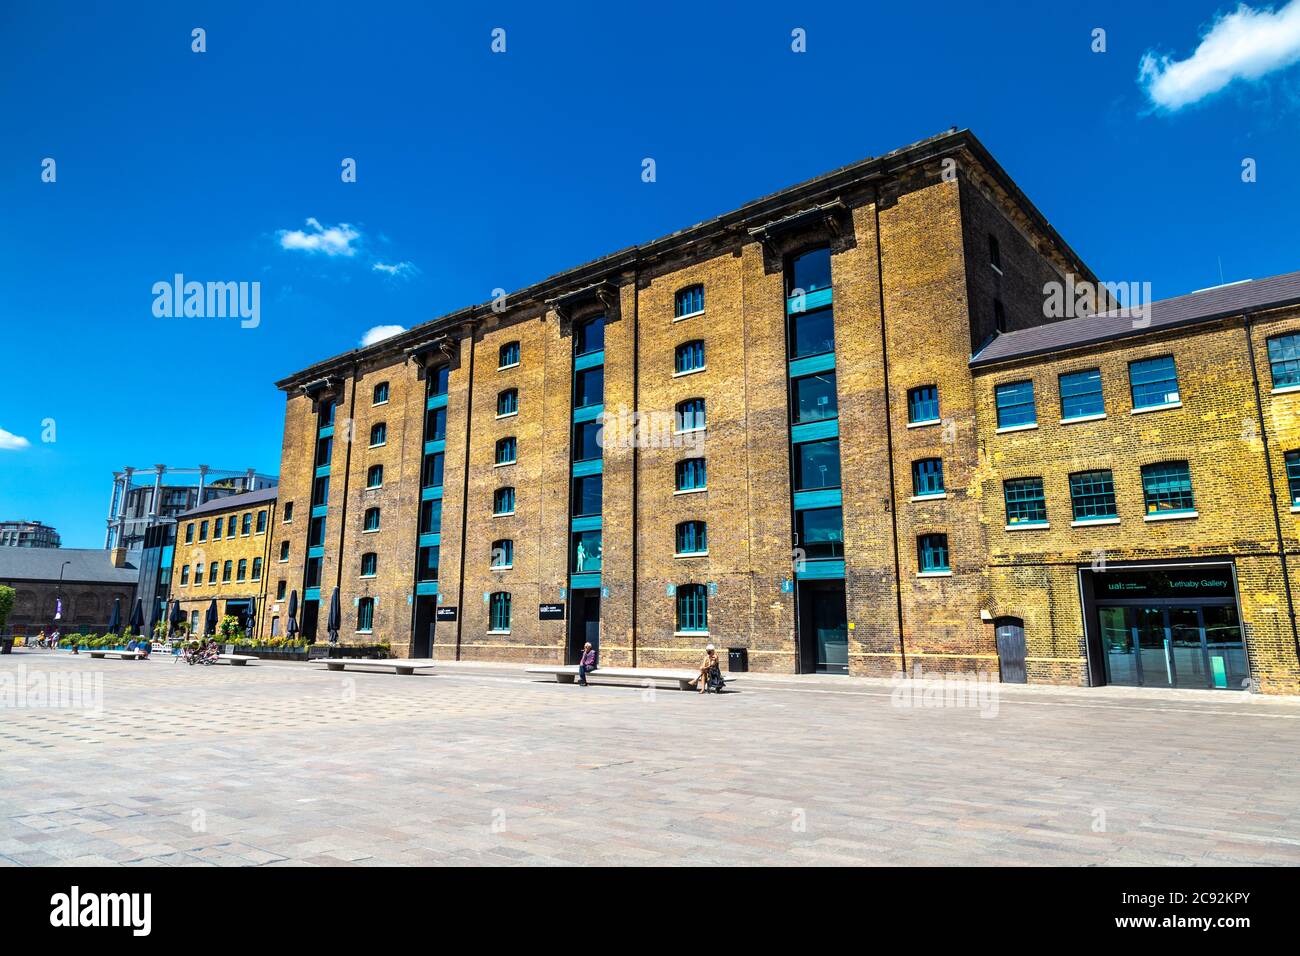 Granary Square and the Central Saint Martins building in King's Cross, London, UK Stock Photo